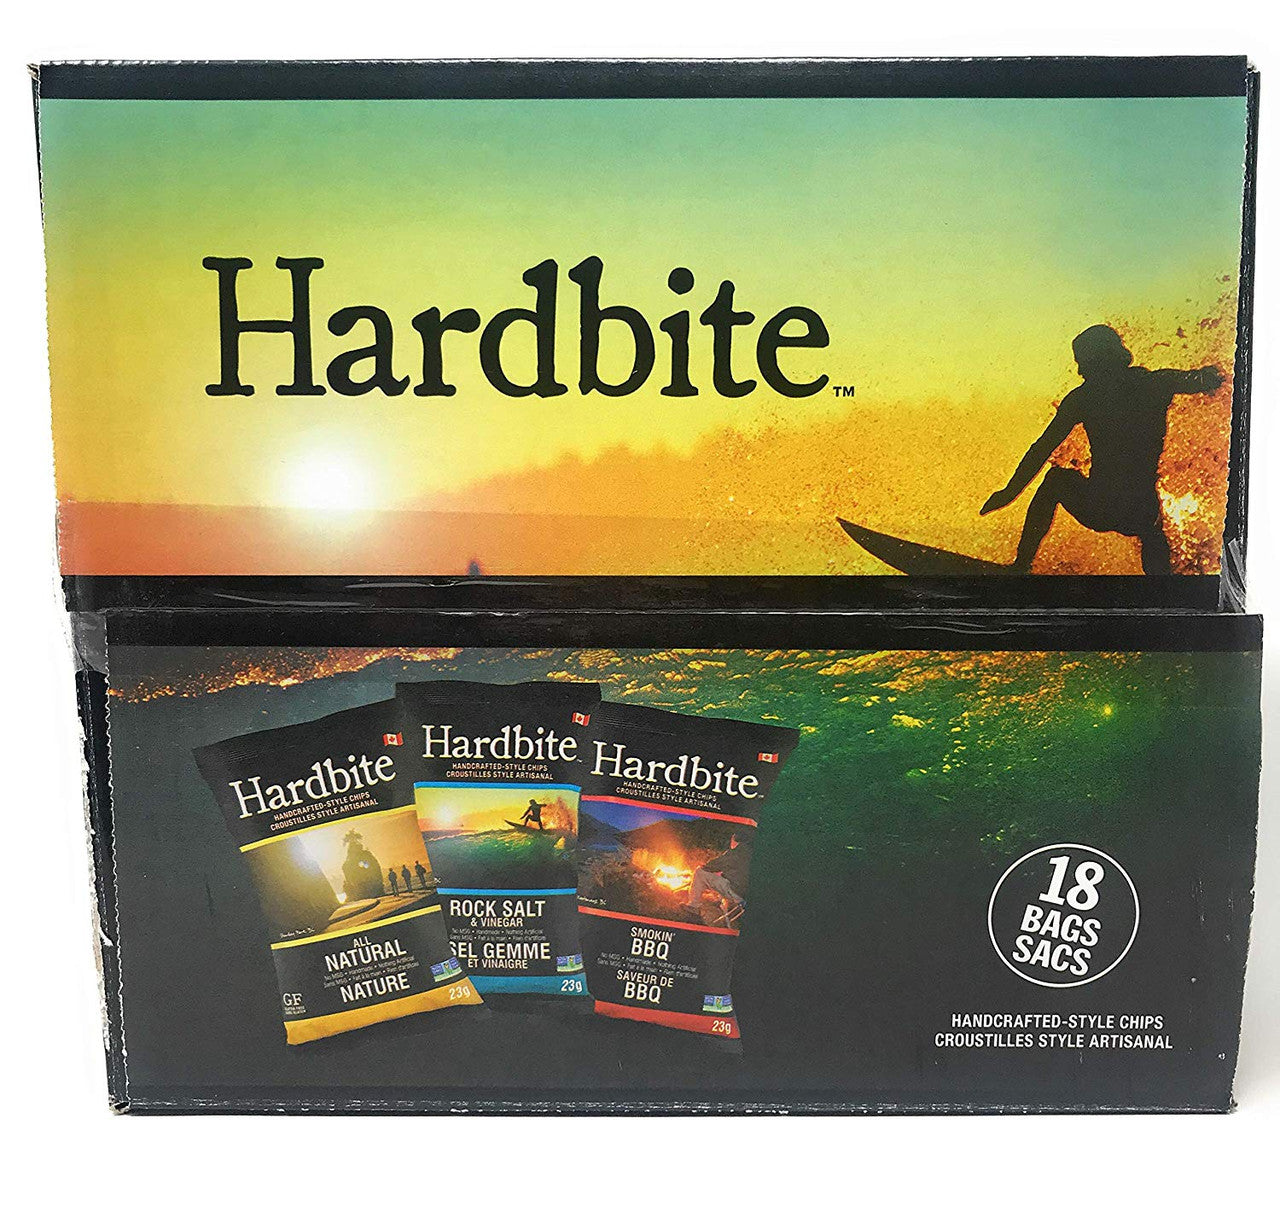 Hardbite Handcrafted-Style Potato Chips -18 Bags - 6 All Natural, 6 Rock Salt & Vinegar, 6 Smoking' BBQ, {Imported from Canada}